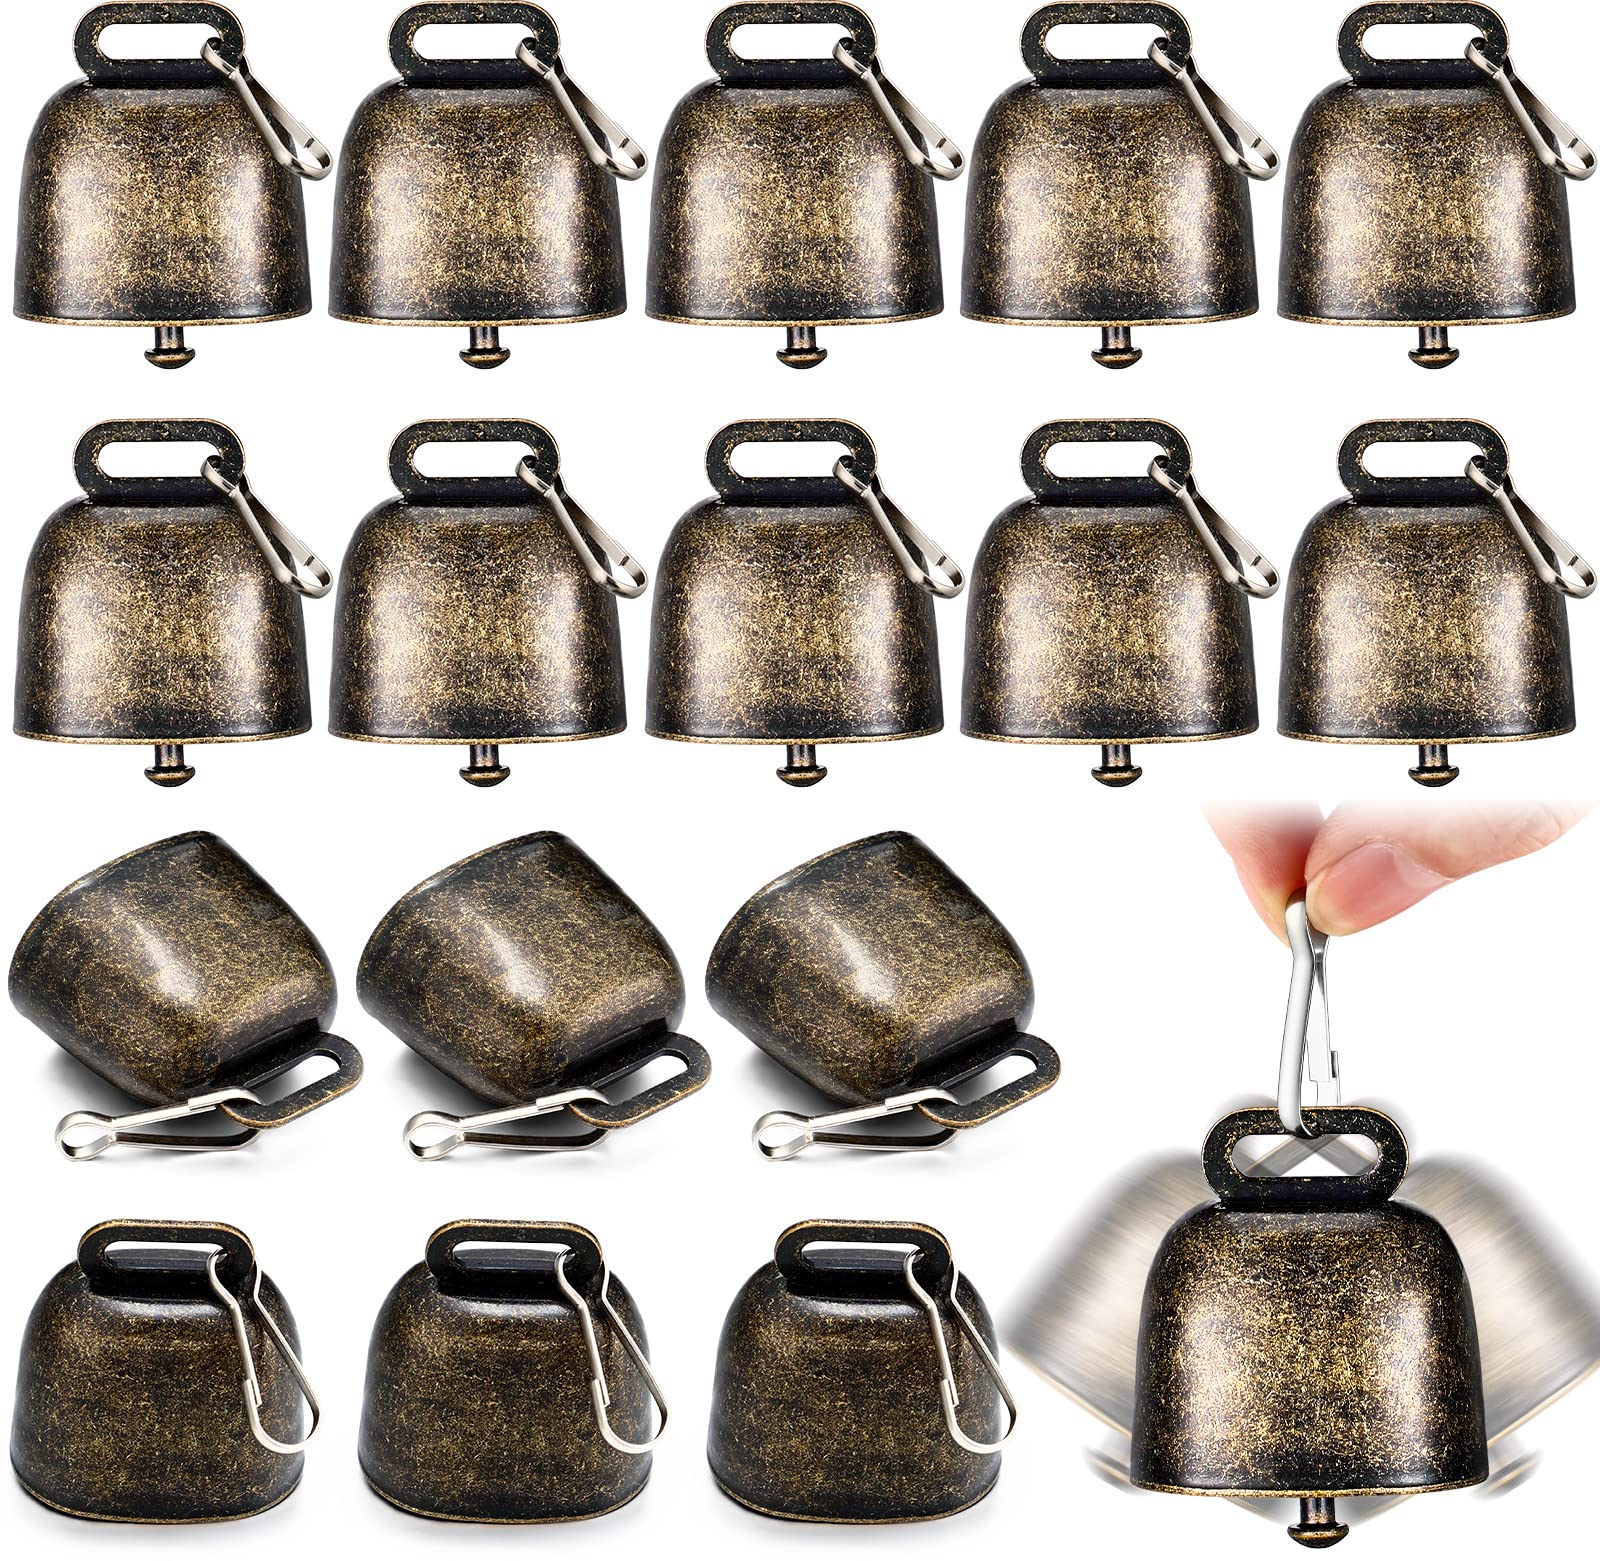 Zhengmy 16 Pcs Cow Bells Bass Bells with Spring Hooks Cow Horse